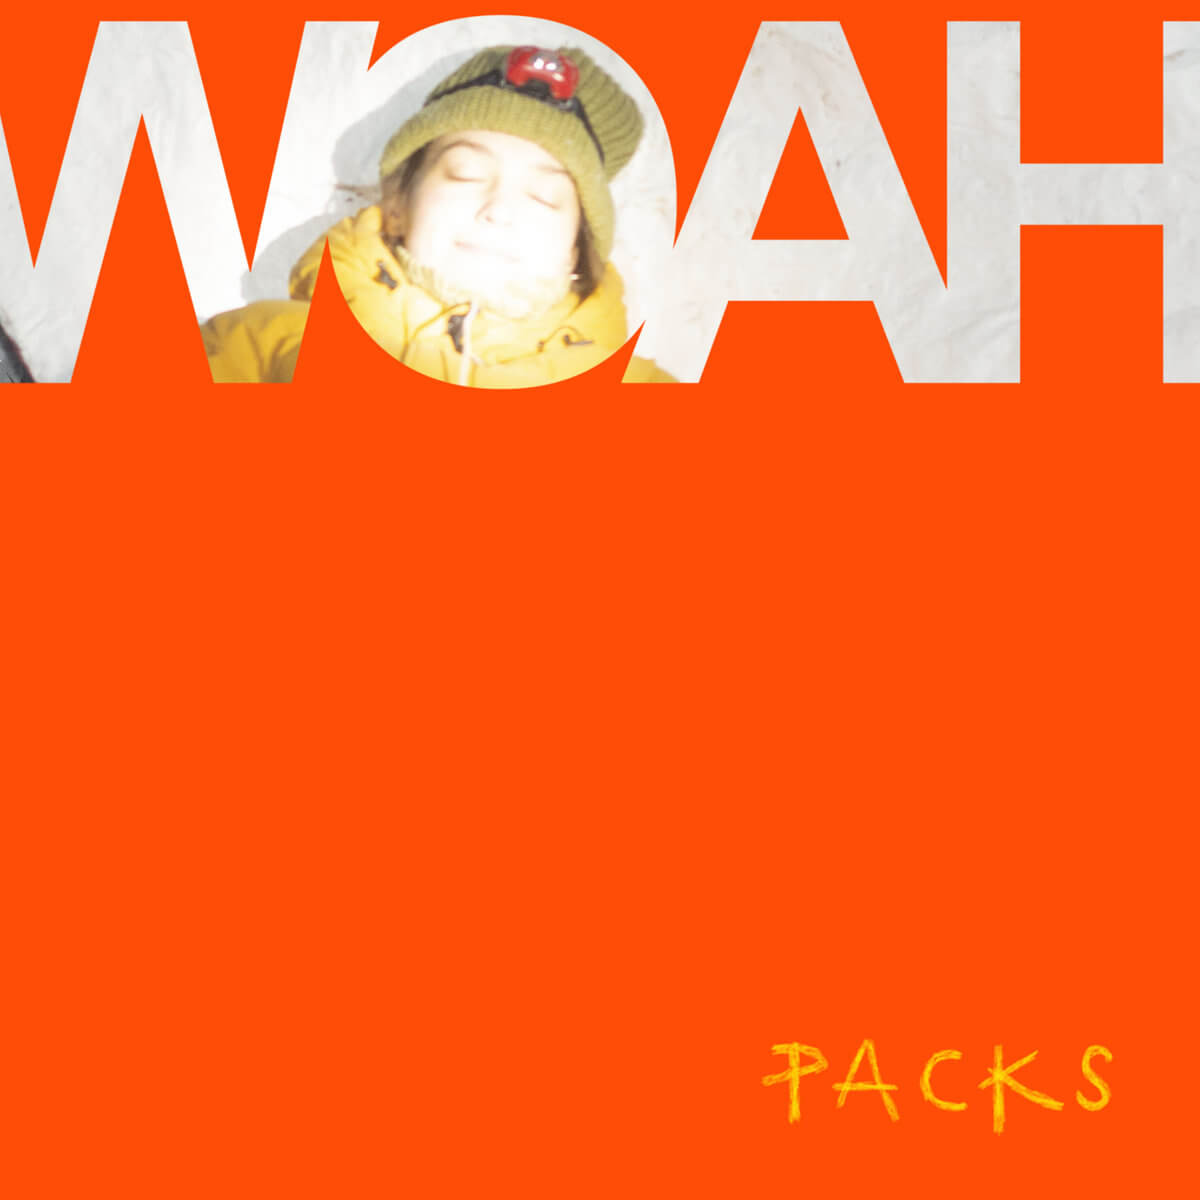 Woah by Packs album review. The project of Toronto singer/songwriter Madeline Link's new EP is out now via Royal Mountain/Fire Talk Records